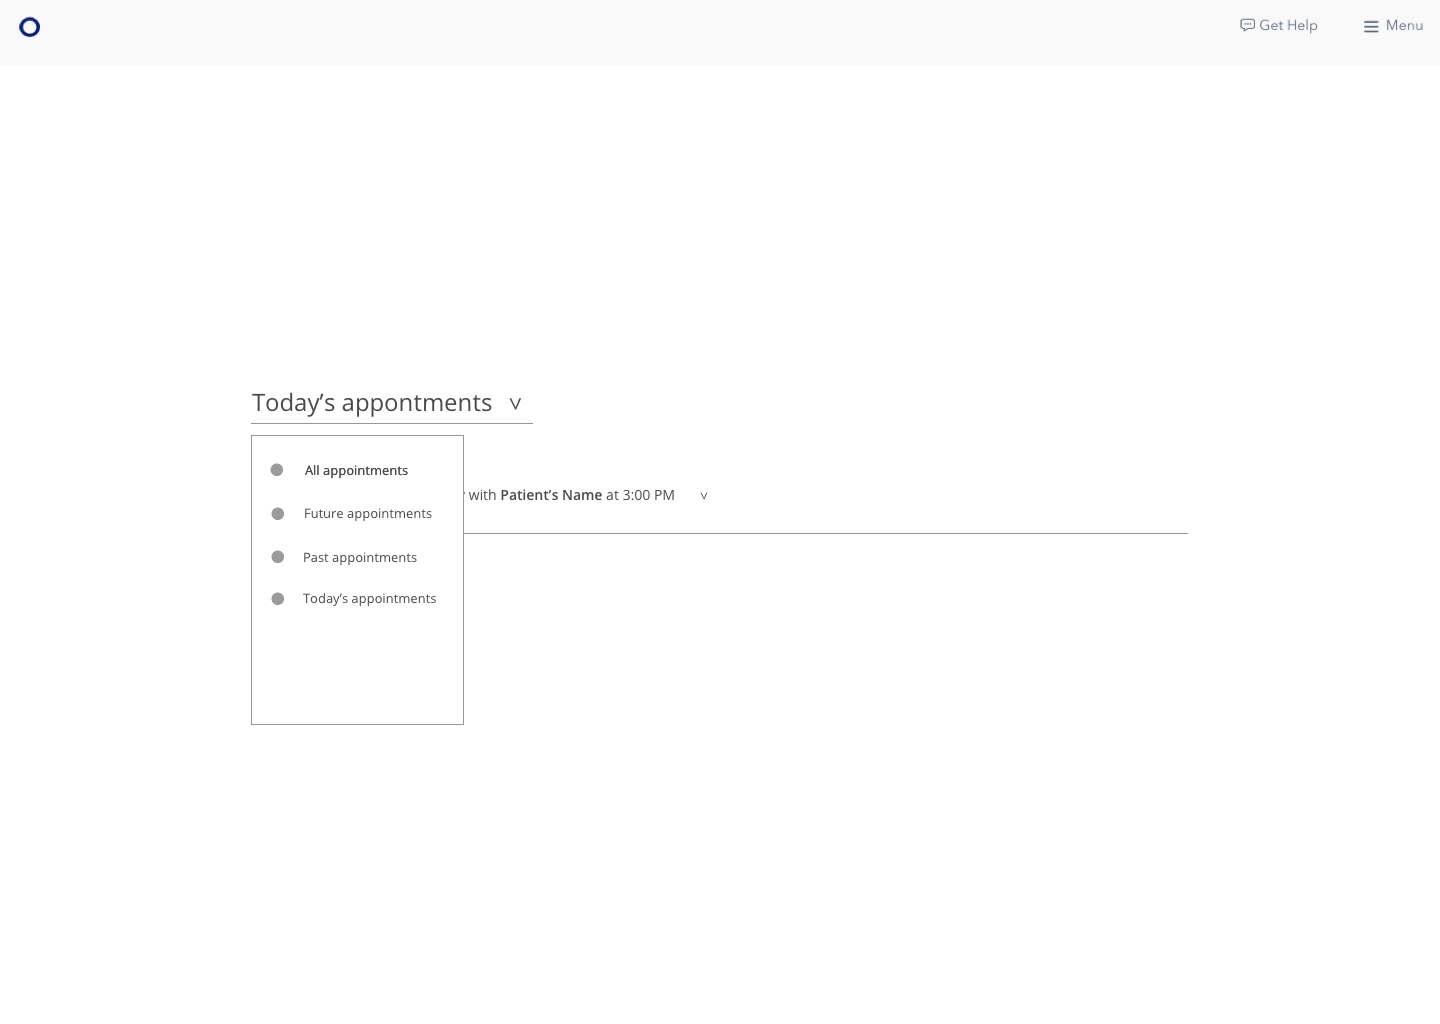 02.01_Appointments page_list options.png